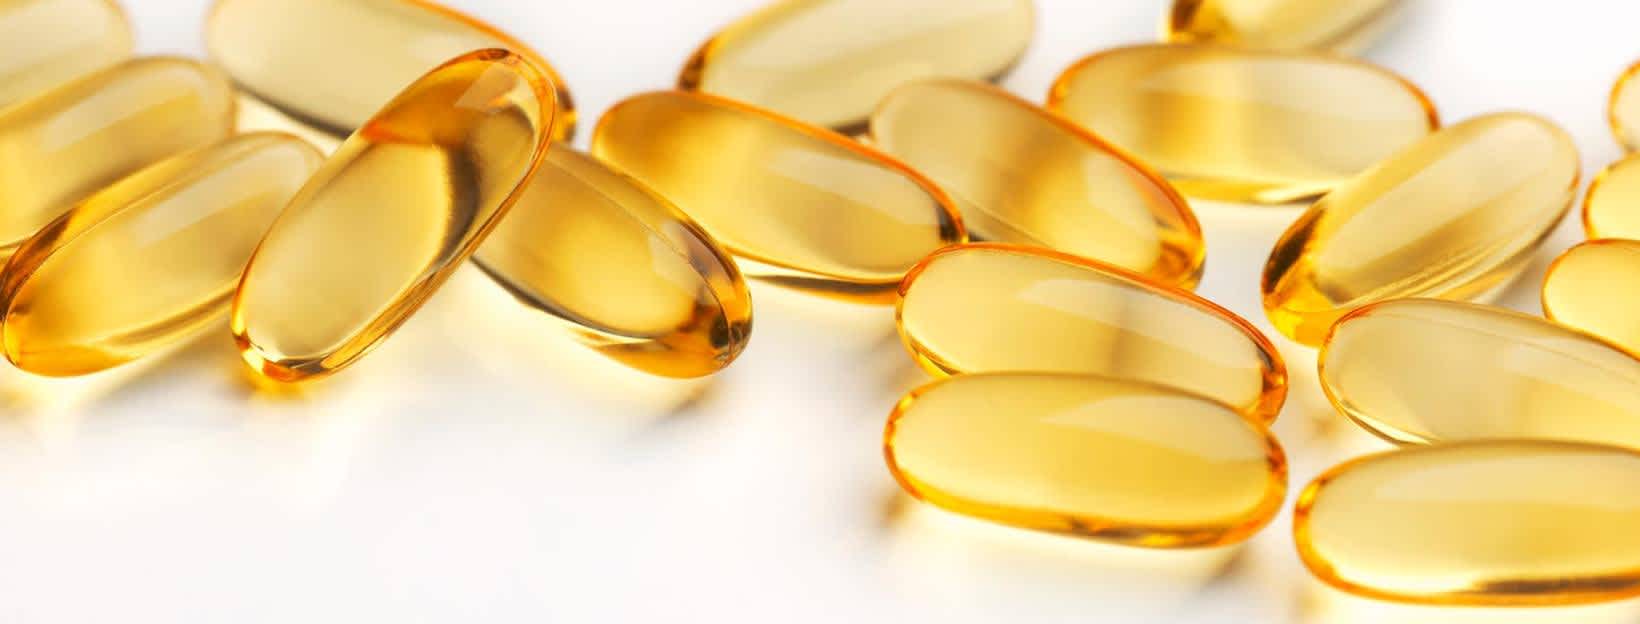 Fish oil supplements lying on table